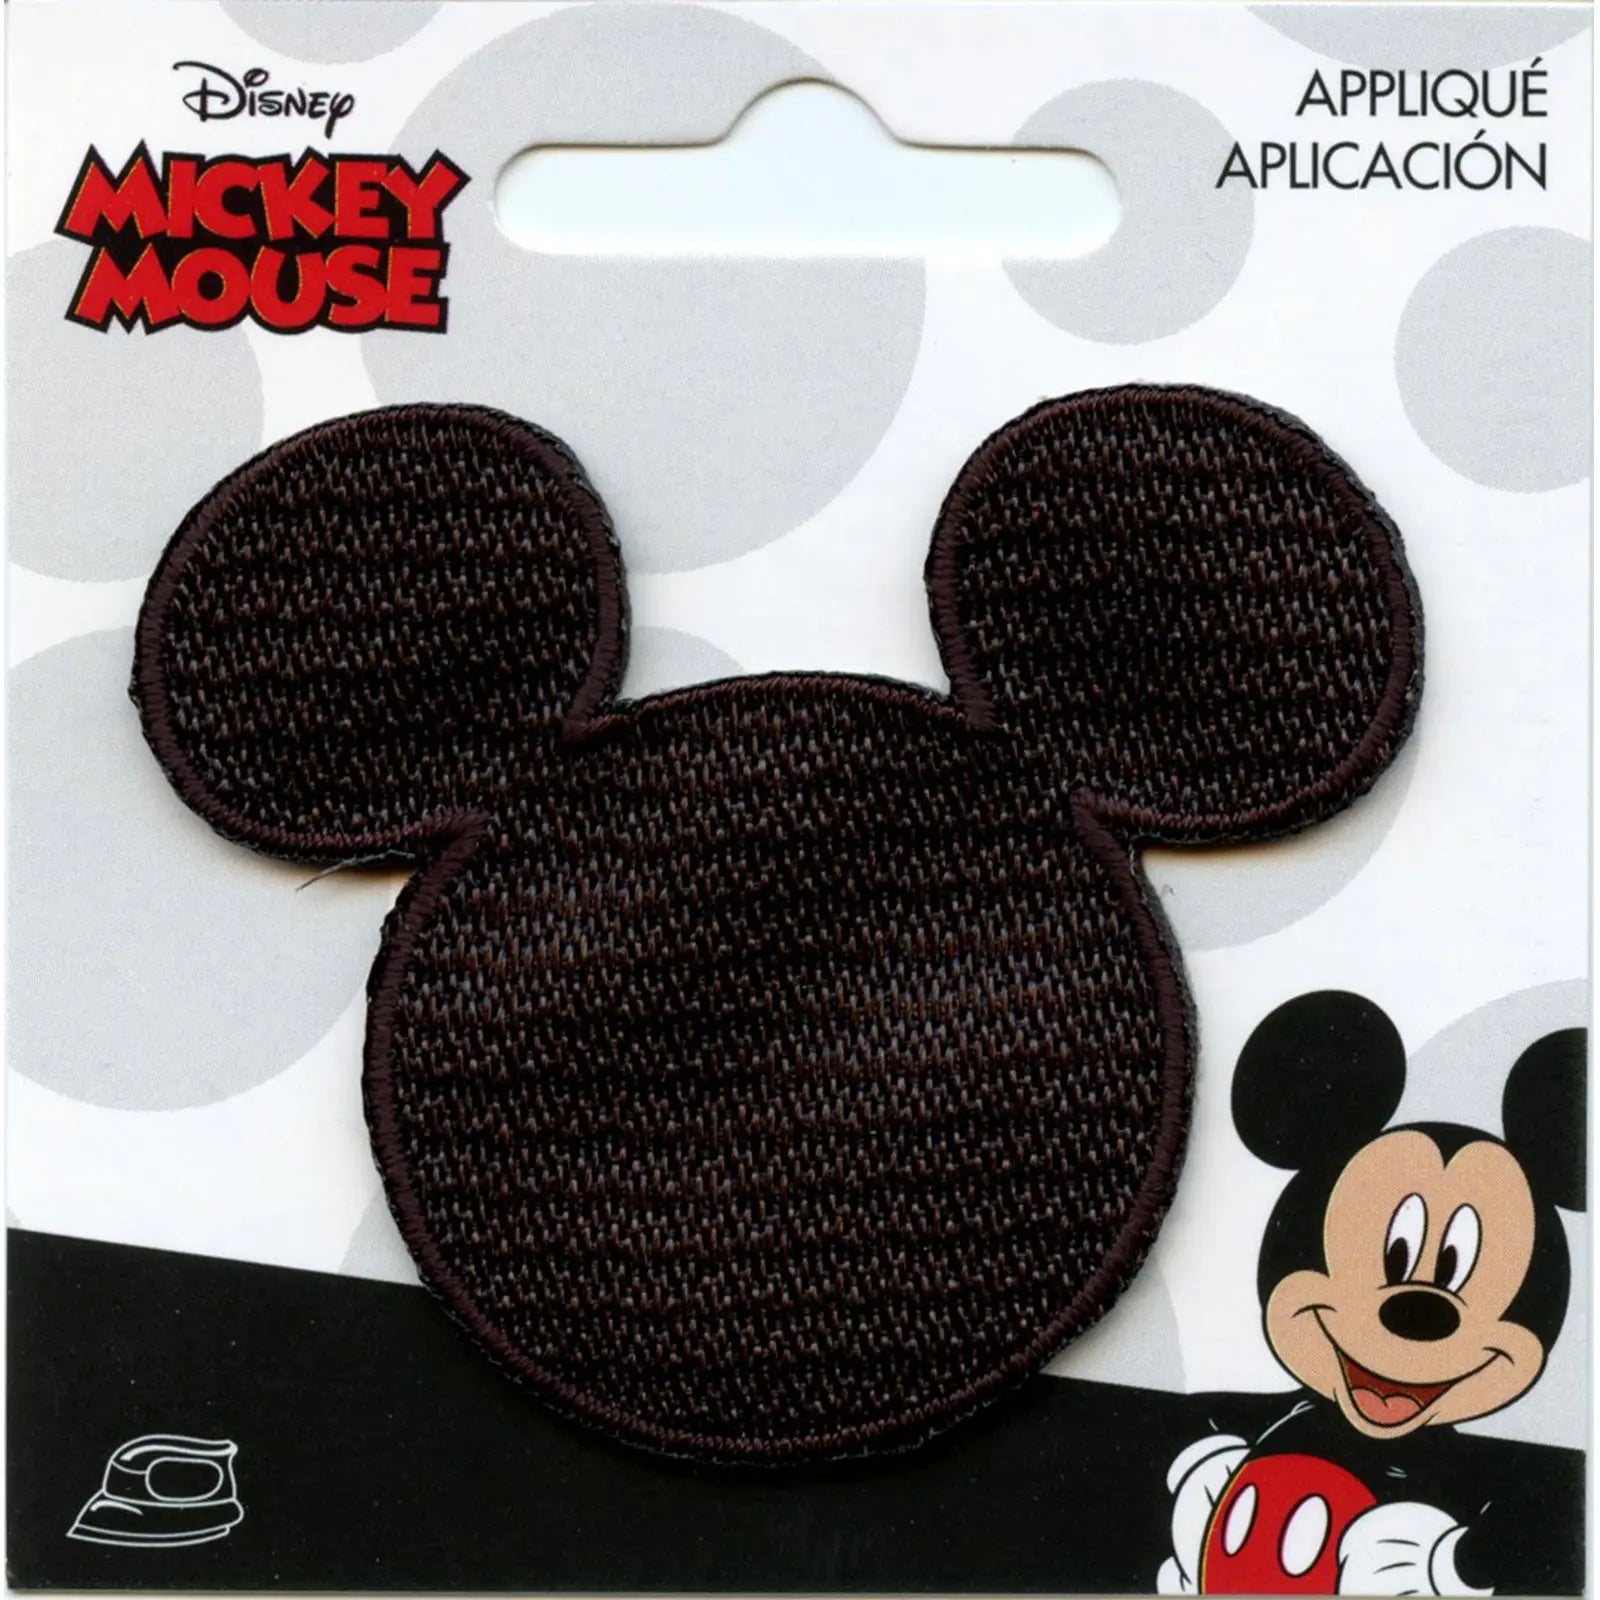 Wrights Disney Mickey Mouse Iron-On Applique-Mickey Mouse